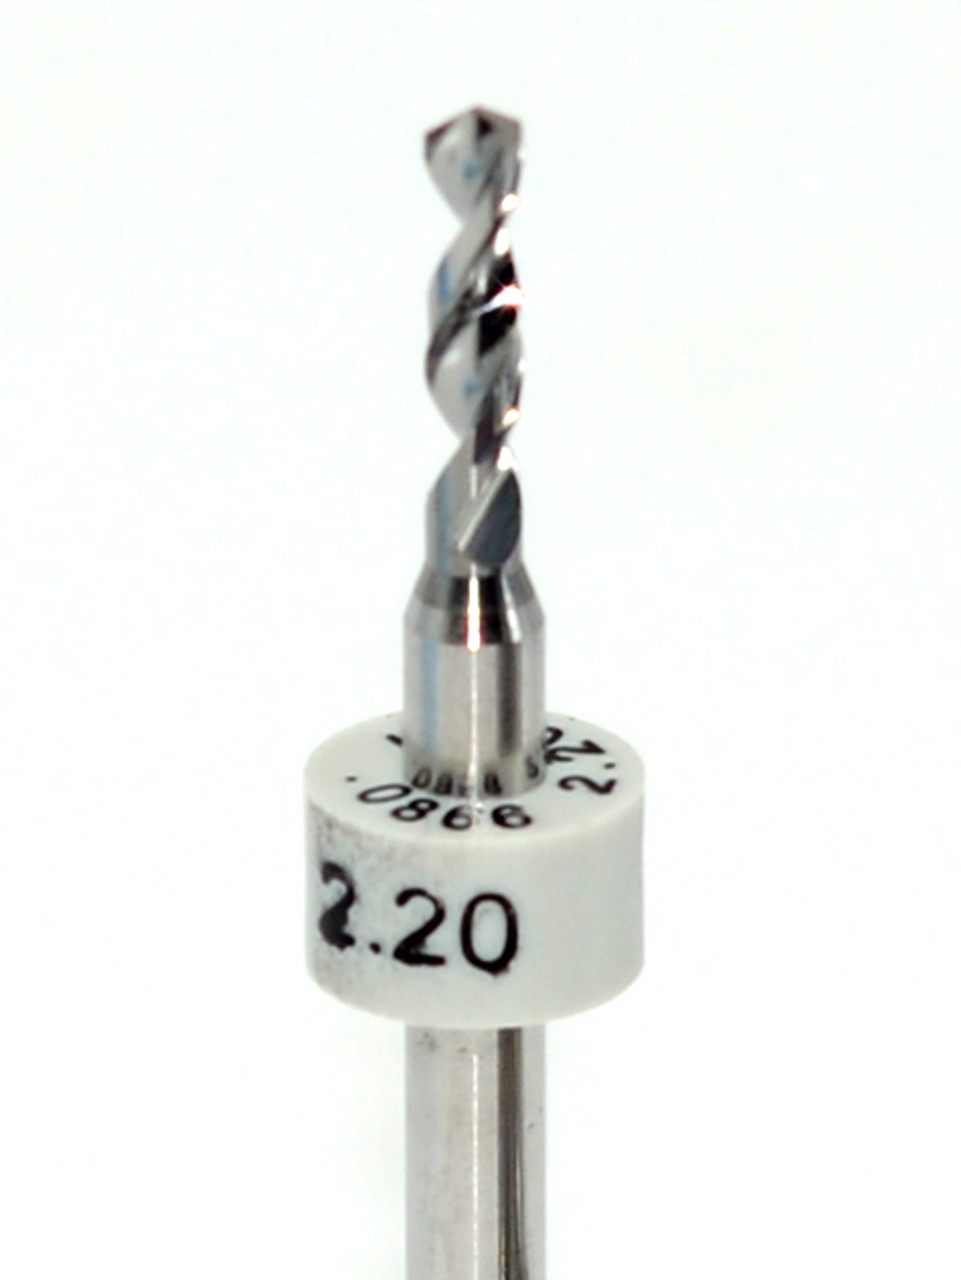 Drill bit Size: 2.20mm  

 Flute length: sizes .50 to .65mm 8.90mm, sizes .70 to 2.50mm 10.50mm

Drill Point 135Â°, Shank .125â€ / 3.18mm,Overall length 38mm /1.50â€

All bits have plastic size rings, Material Micro-Grain Carbide Grade ISO K20 / K30

Drill bits Self centering on flat surface Other surfaces use center drill first